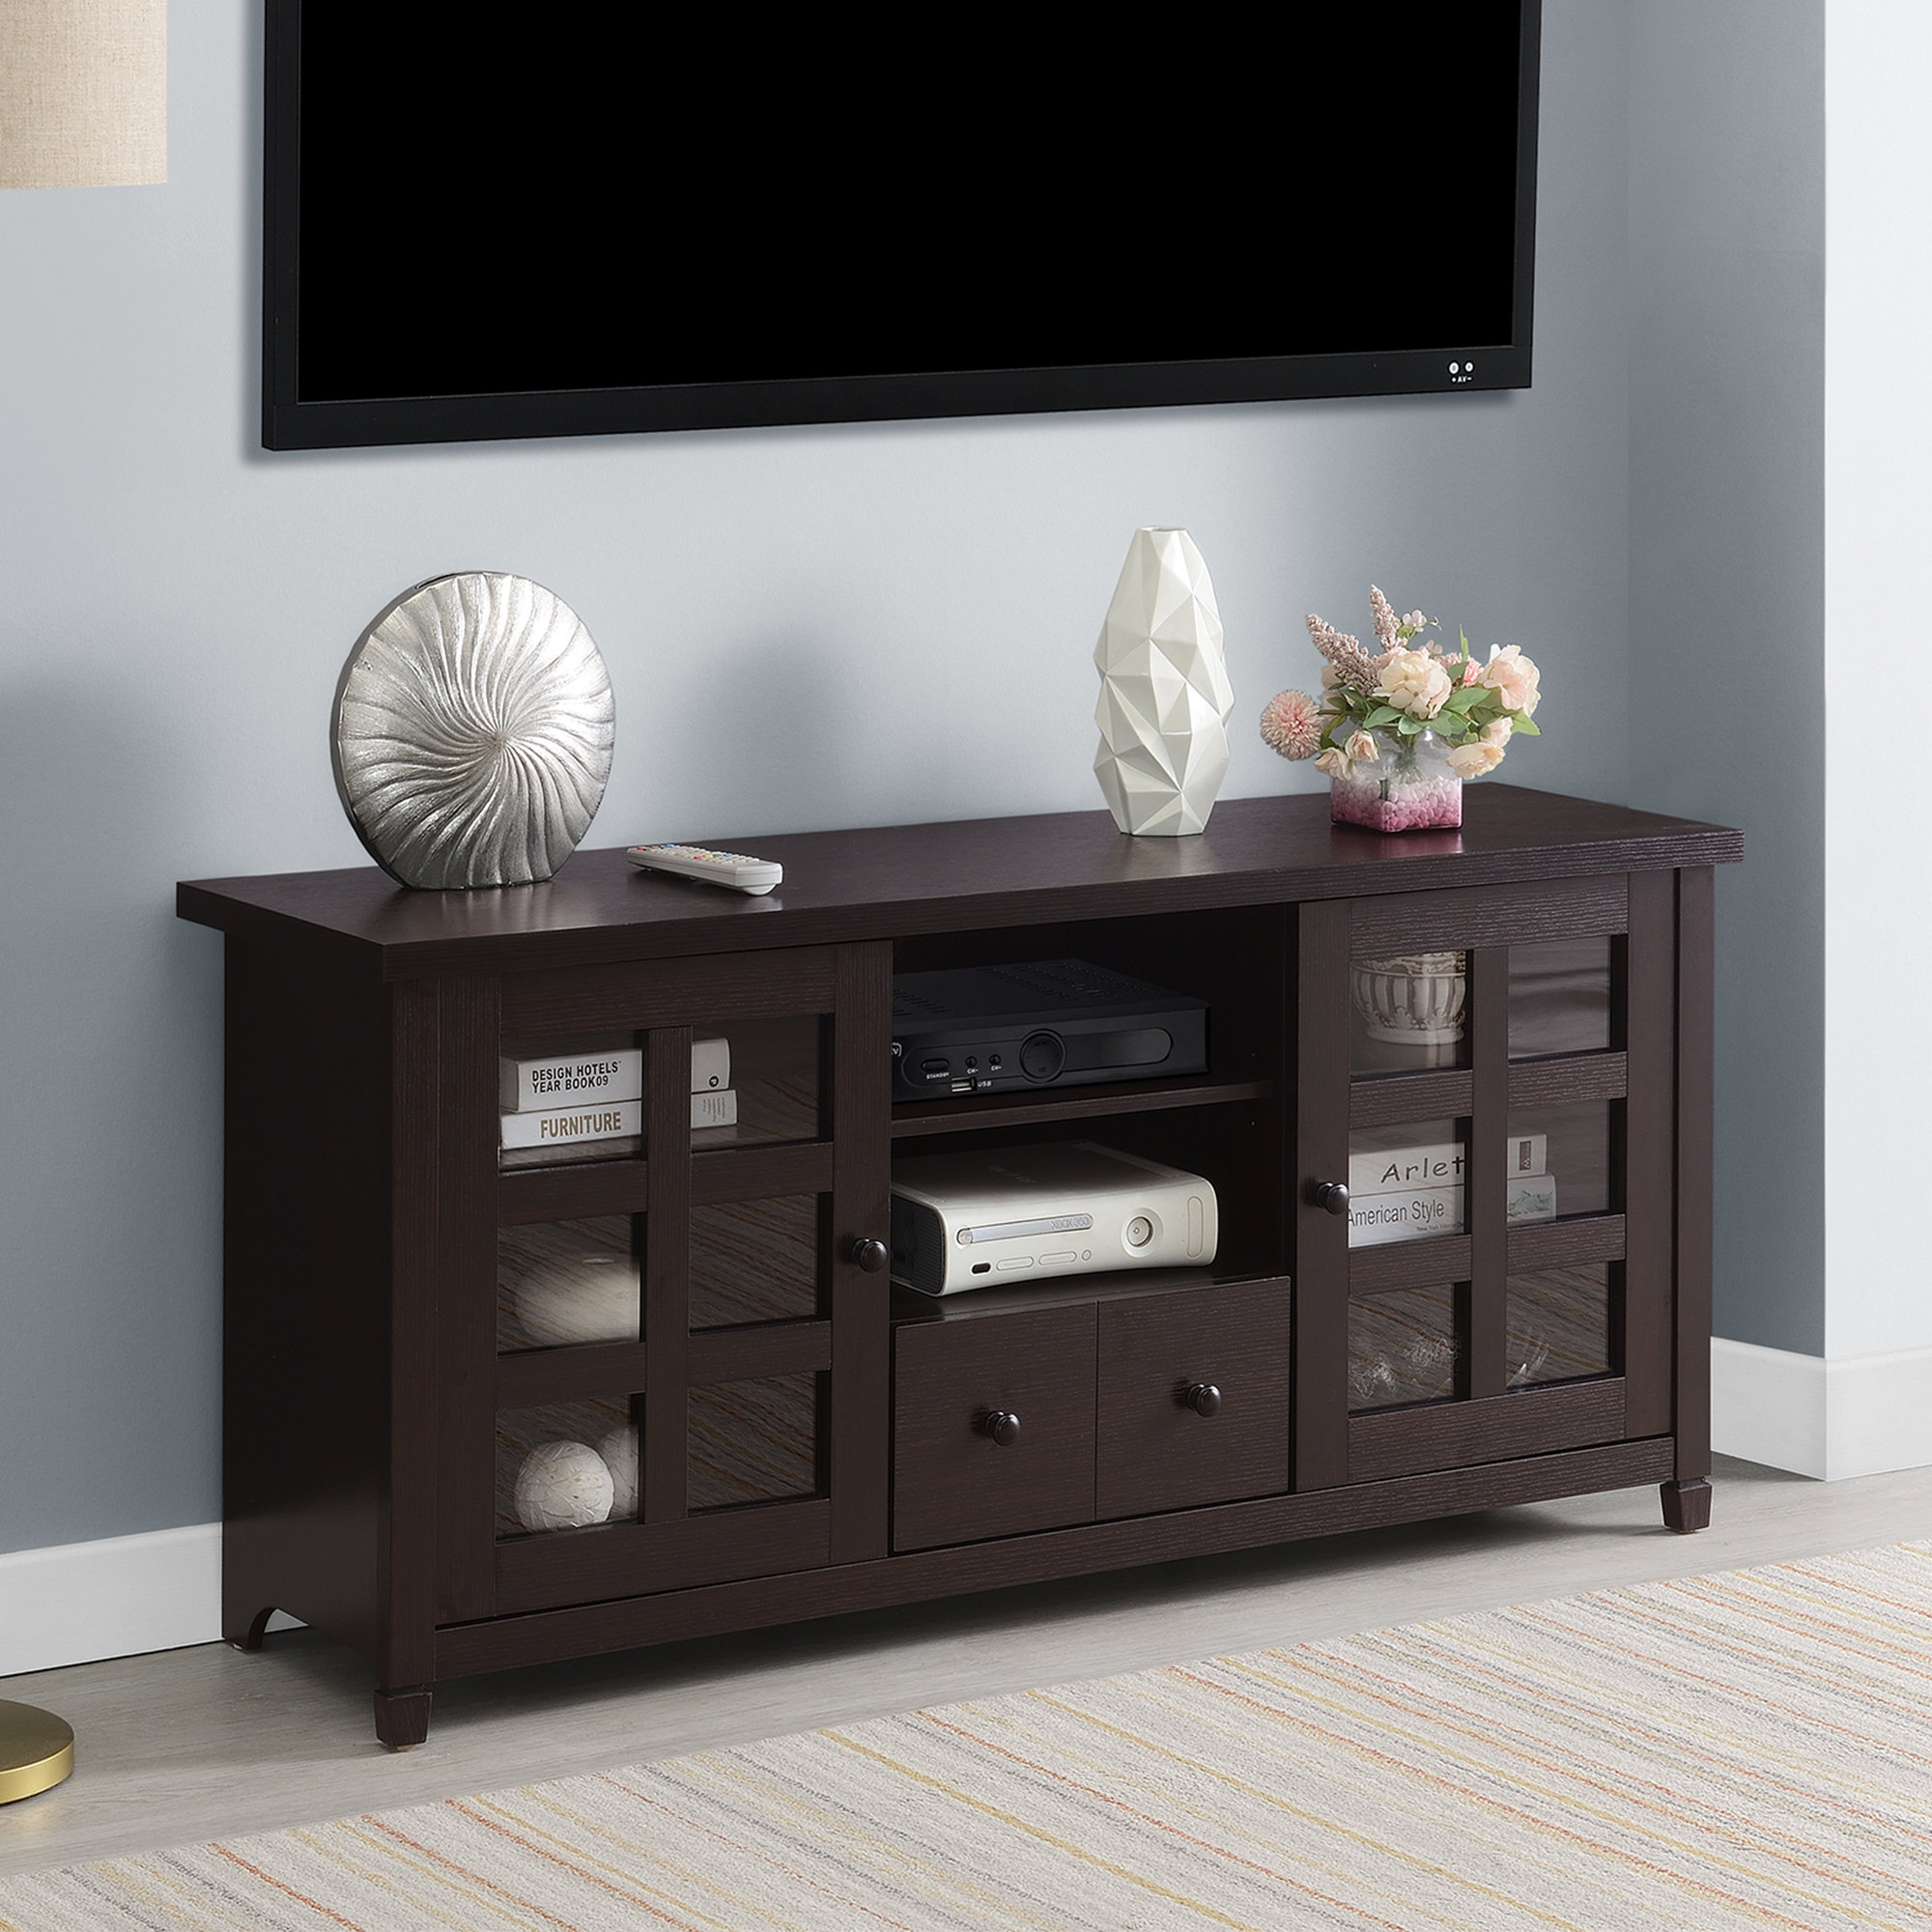 OSP Home Furnishings Discover the Elegant 70 Riley Console